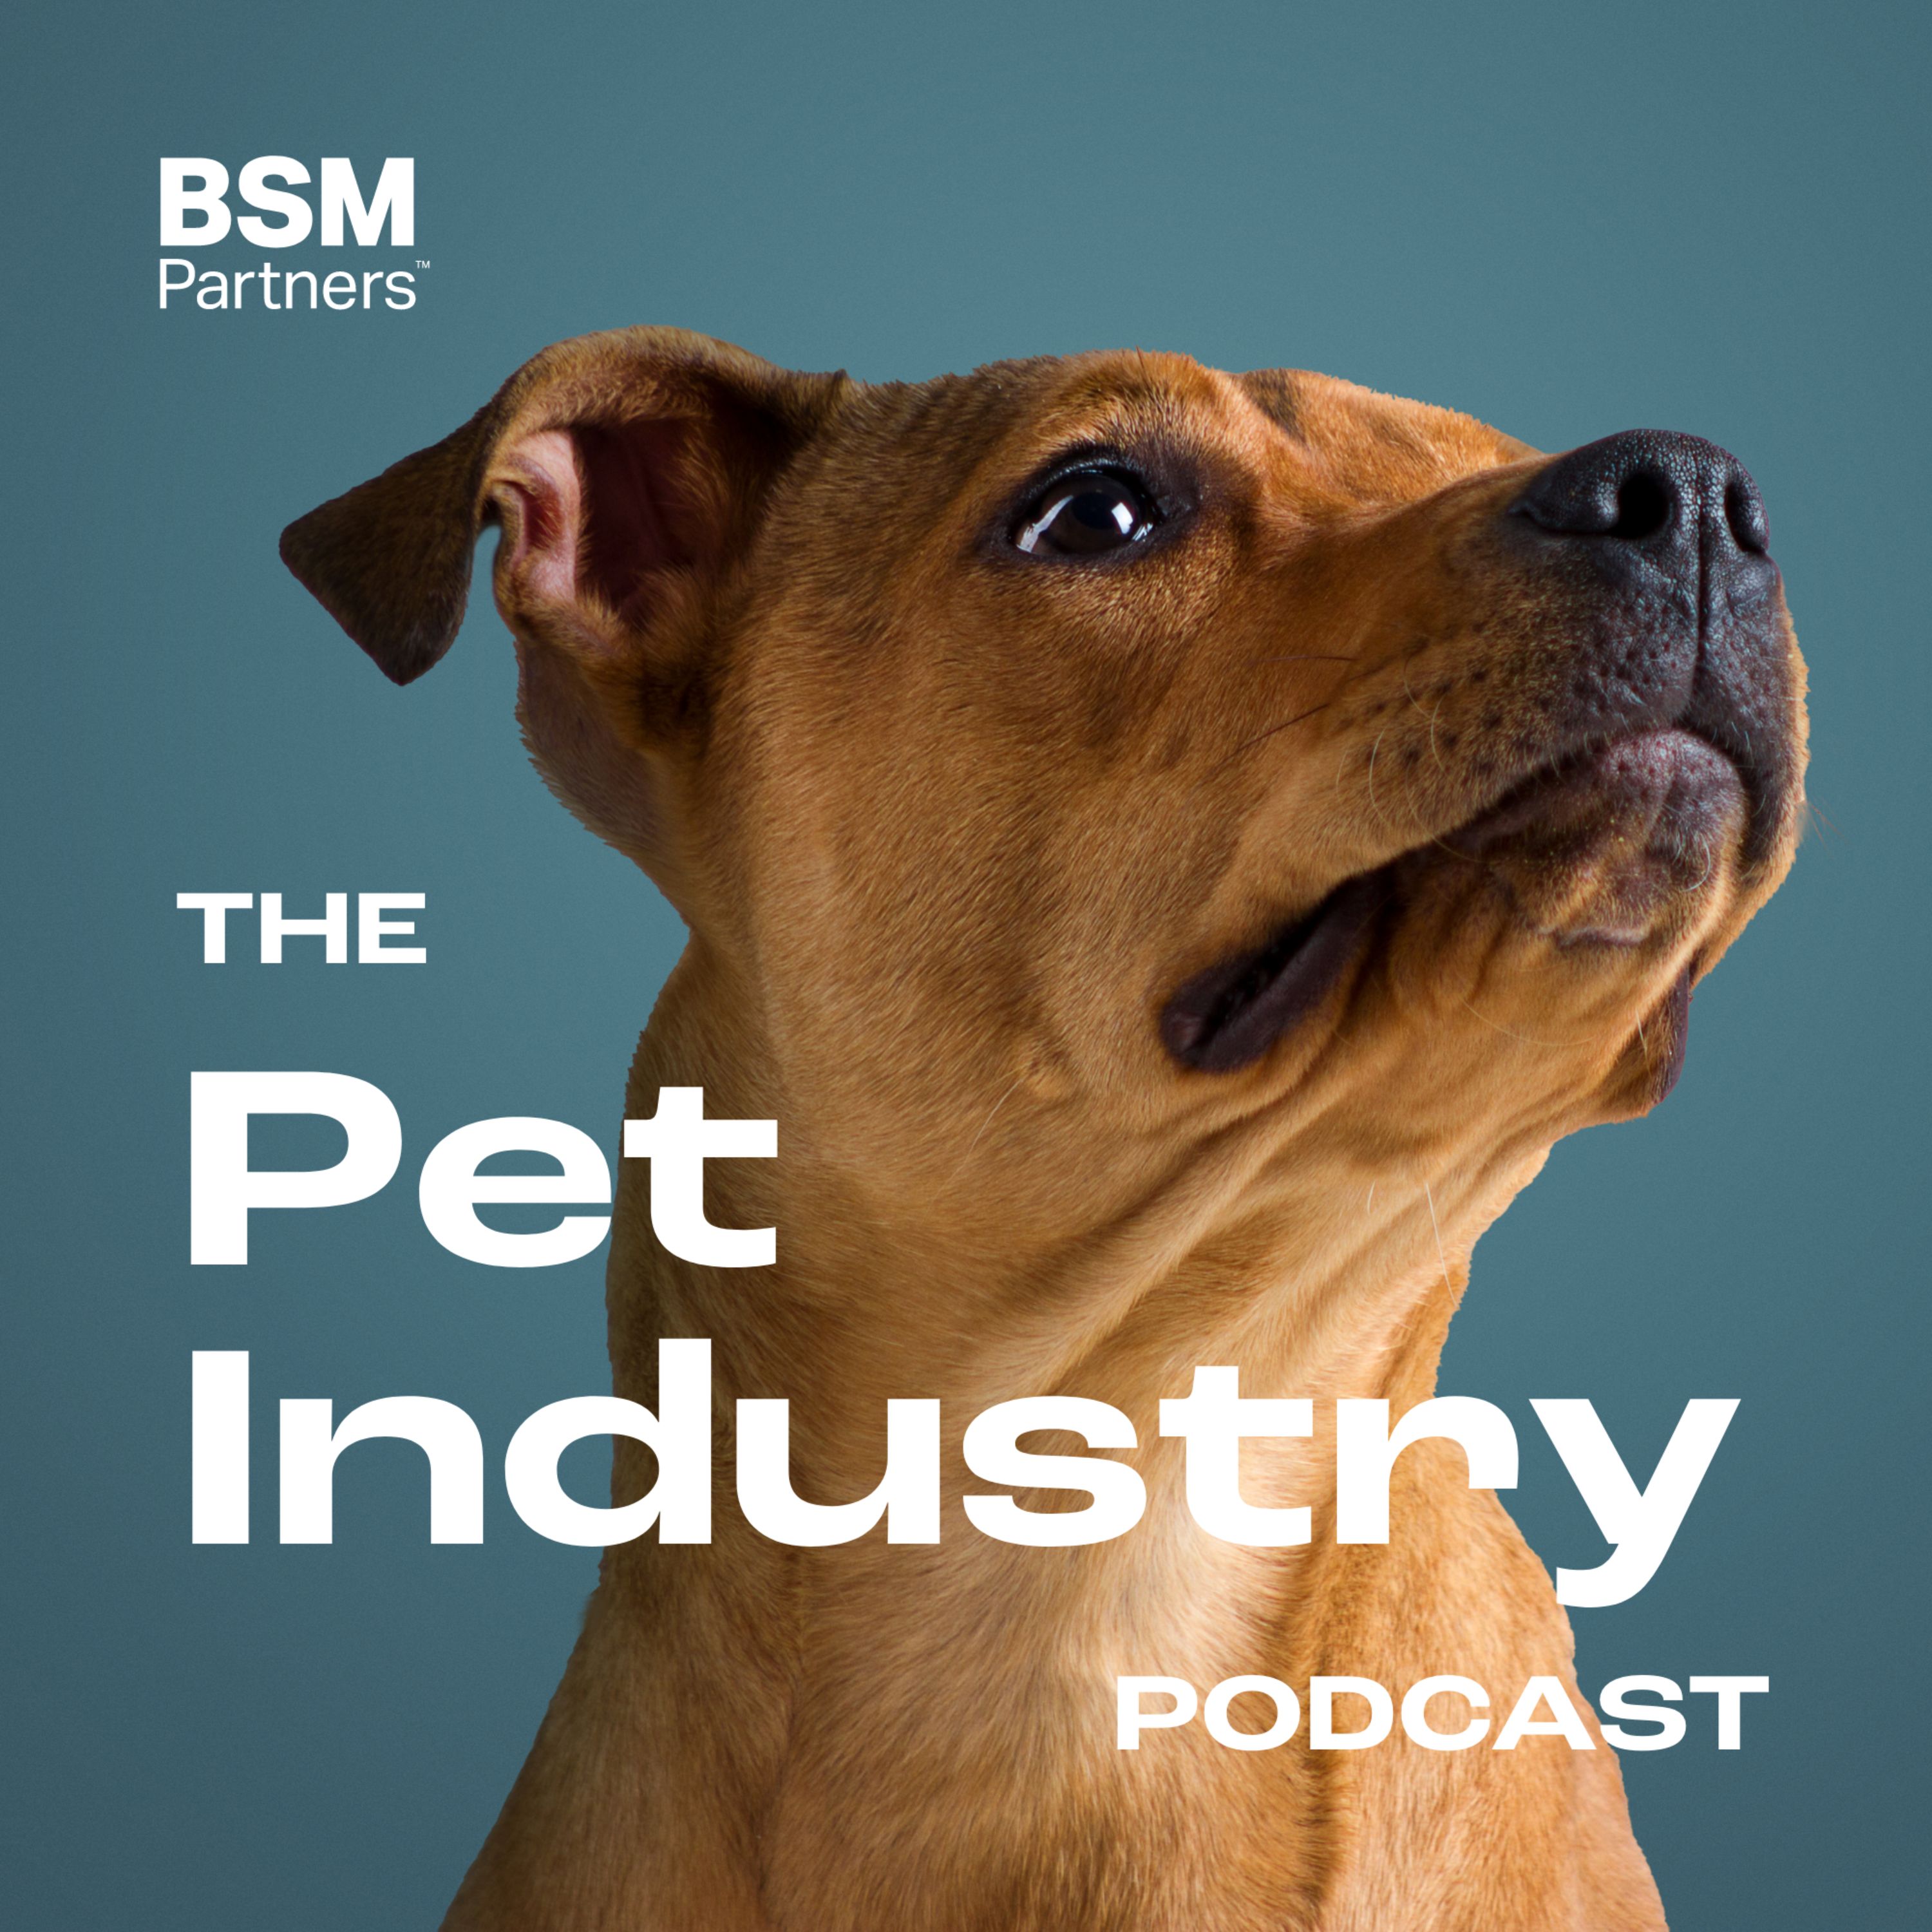 Women in Pet Industry: A Panel Discussion